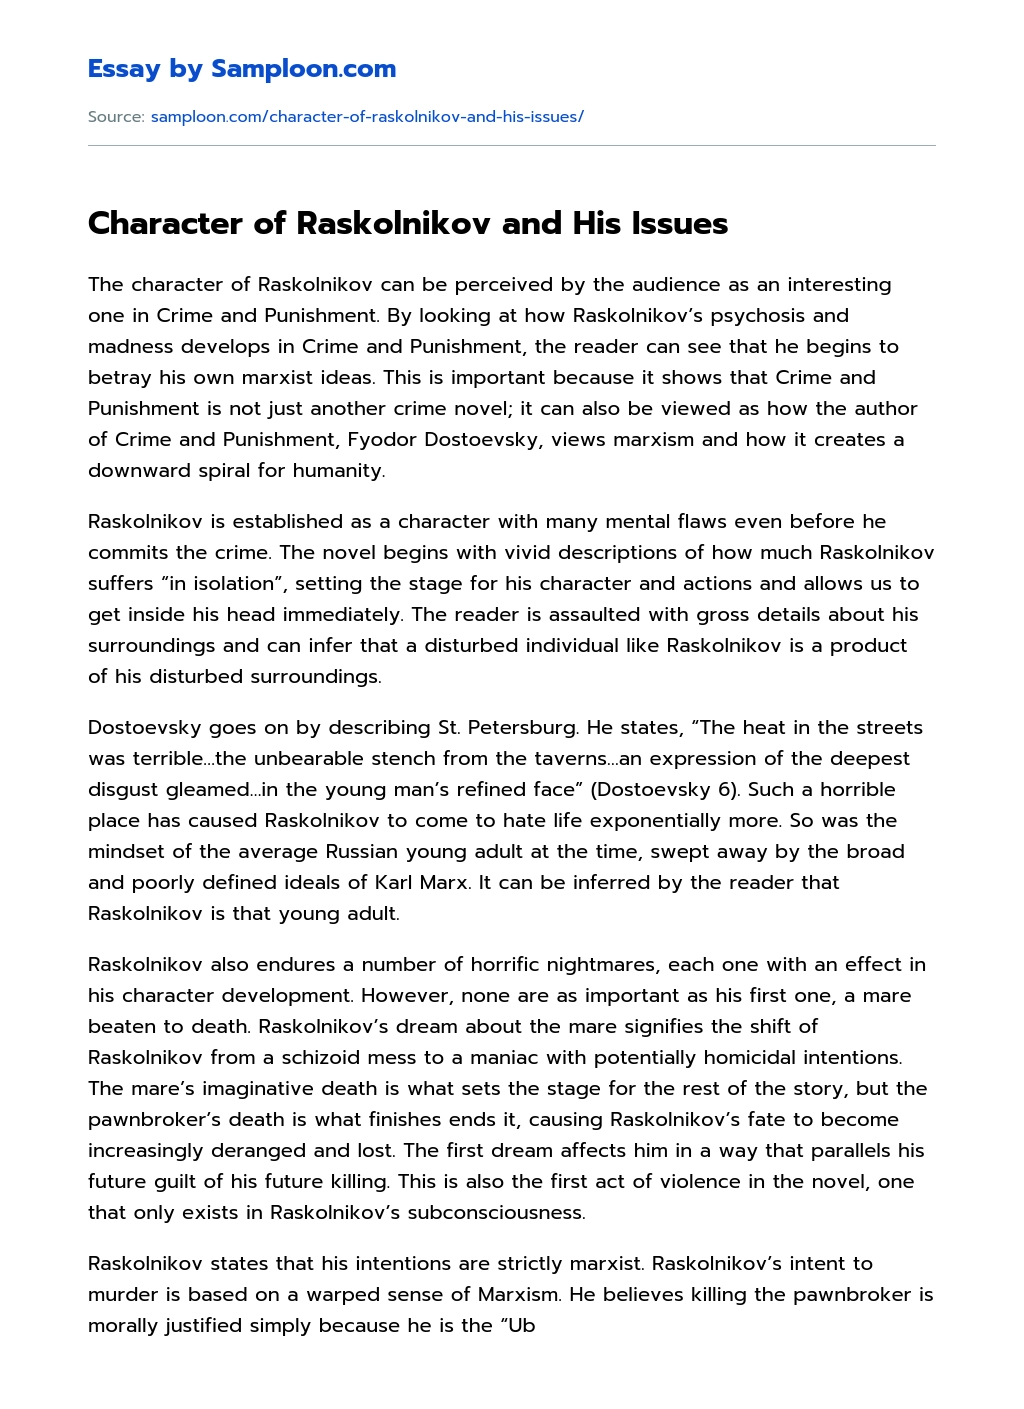 Character of Raskolnikov and His Issues Personal Essay essay